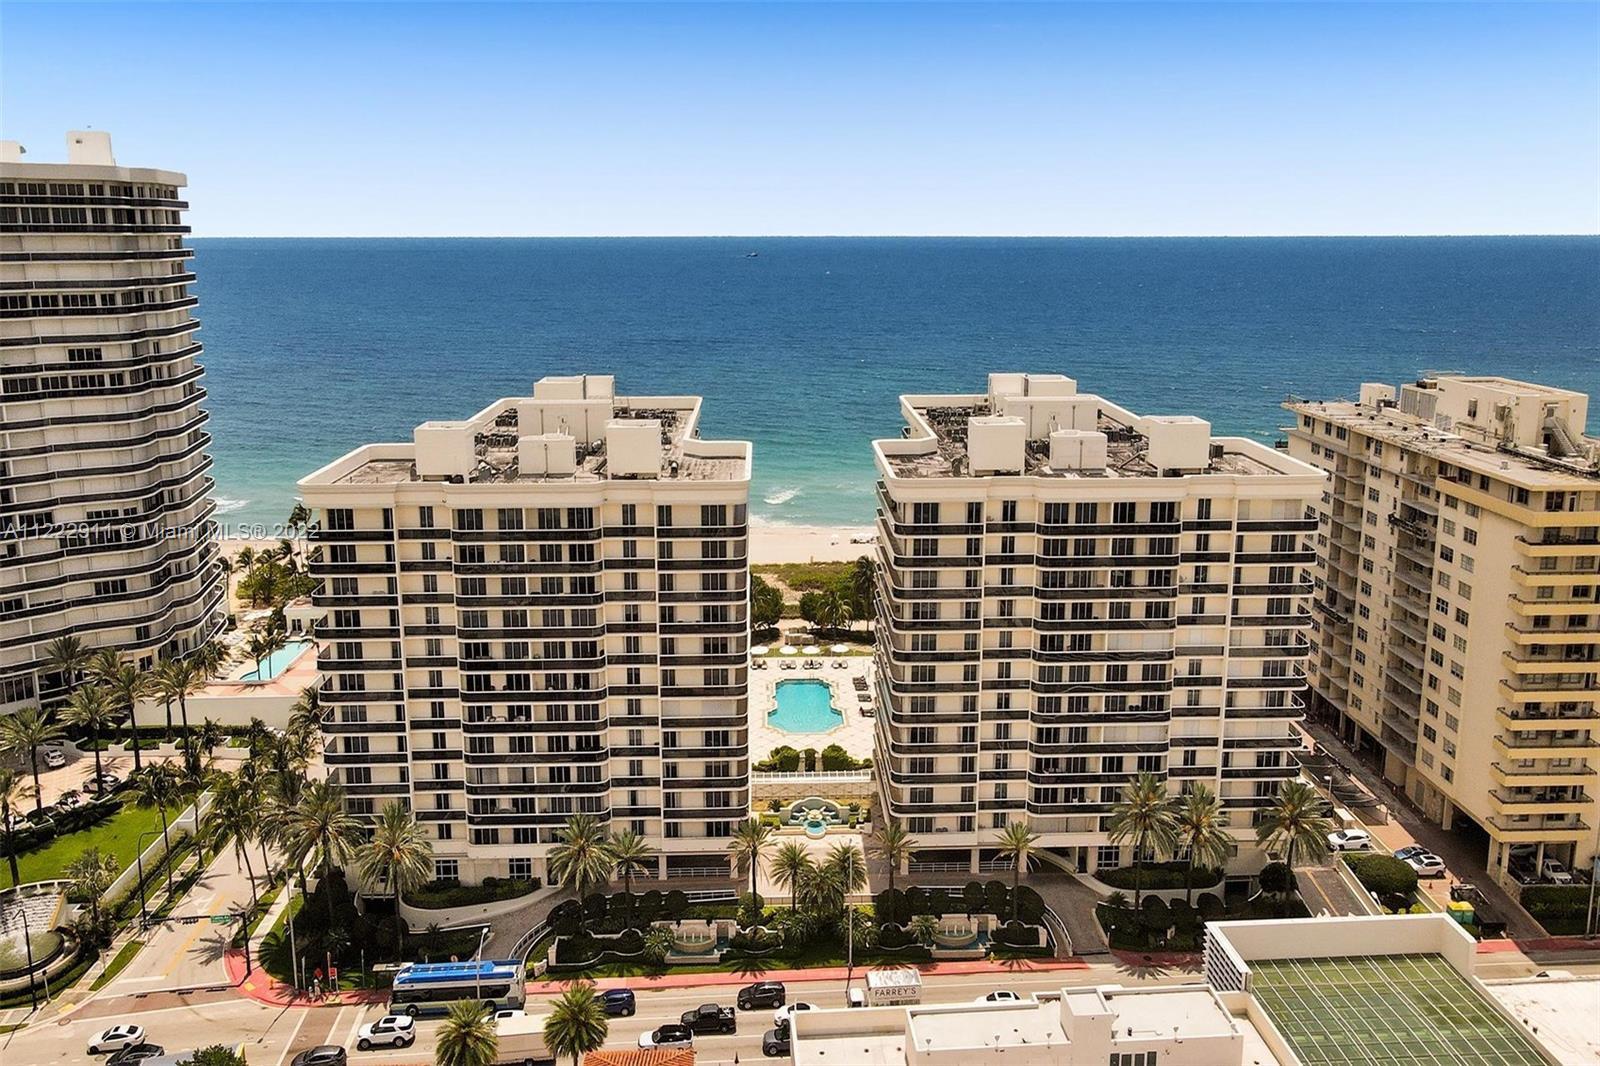 Enter via a semi-private elevator into oceanfront living at the Solimar. This bright and beautiful a